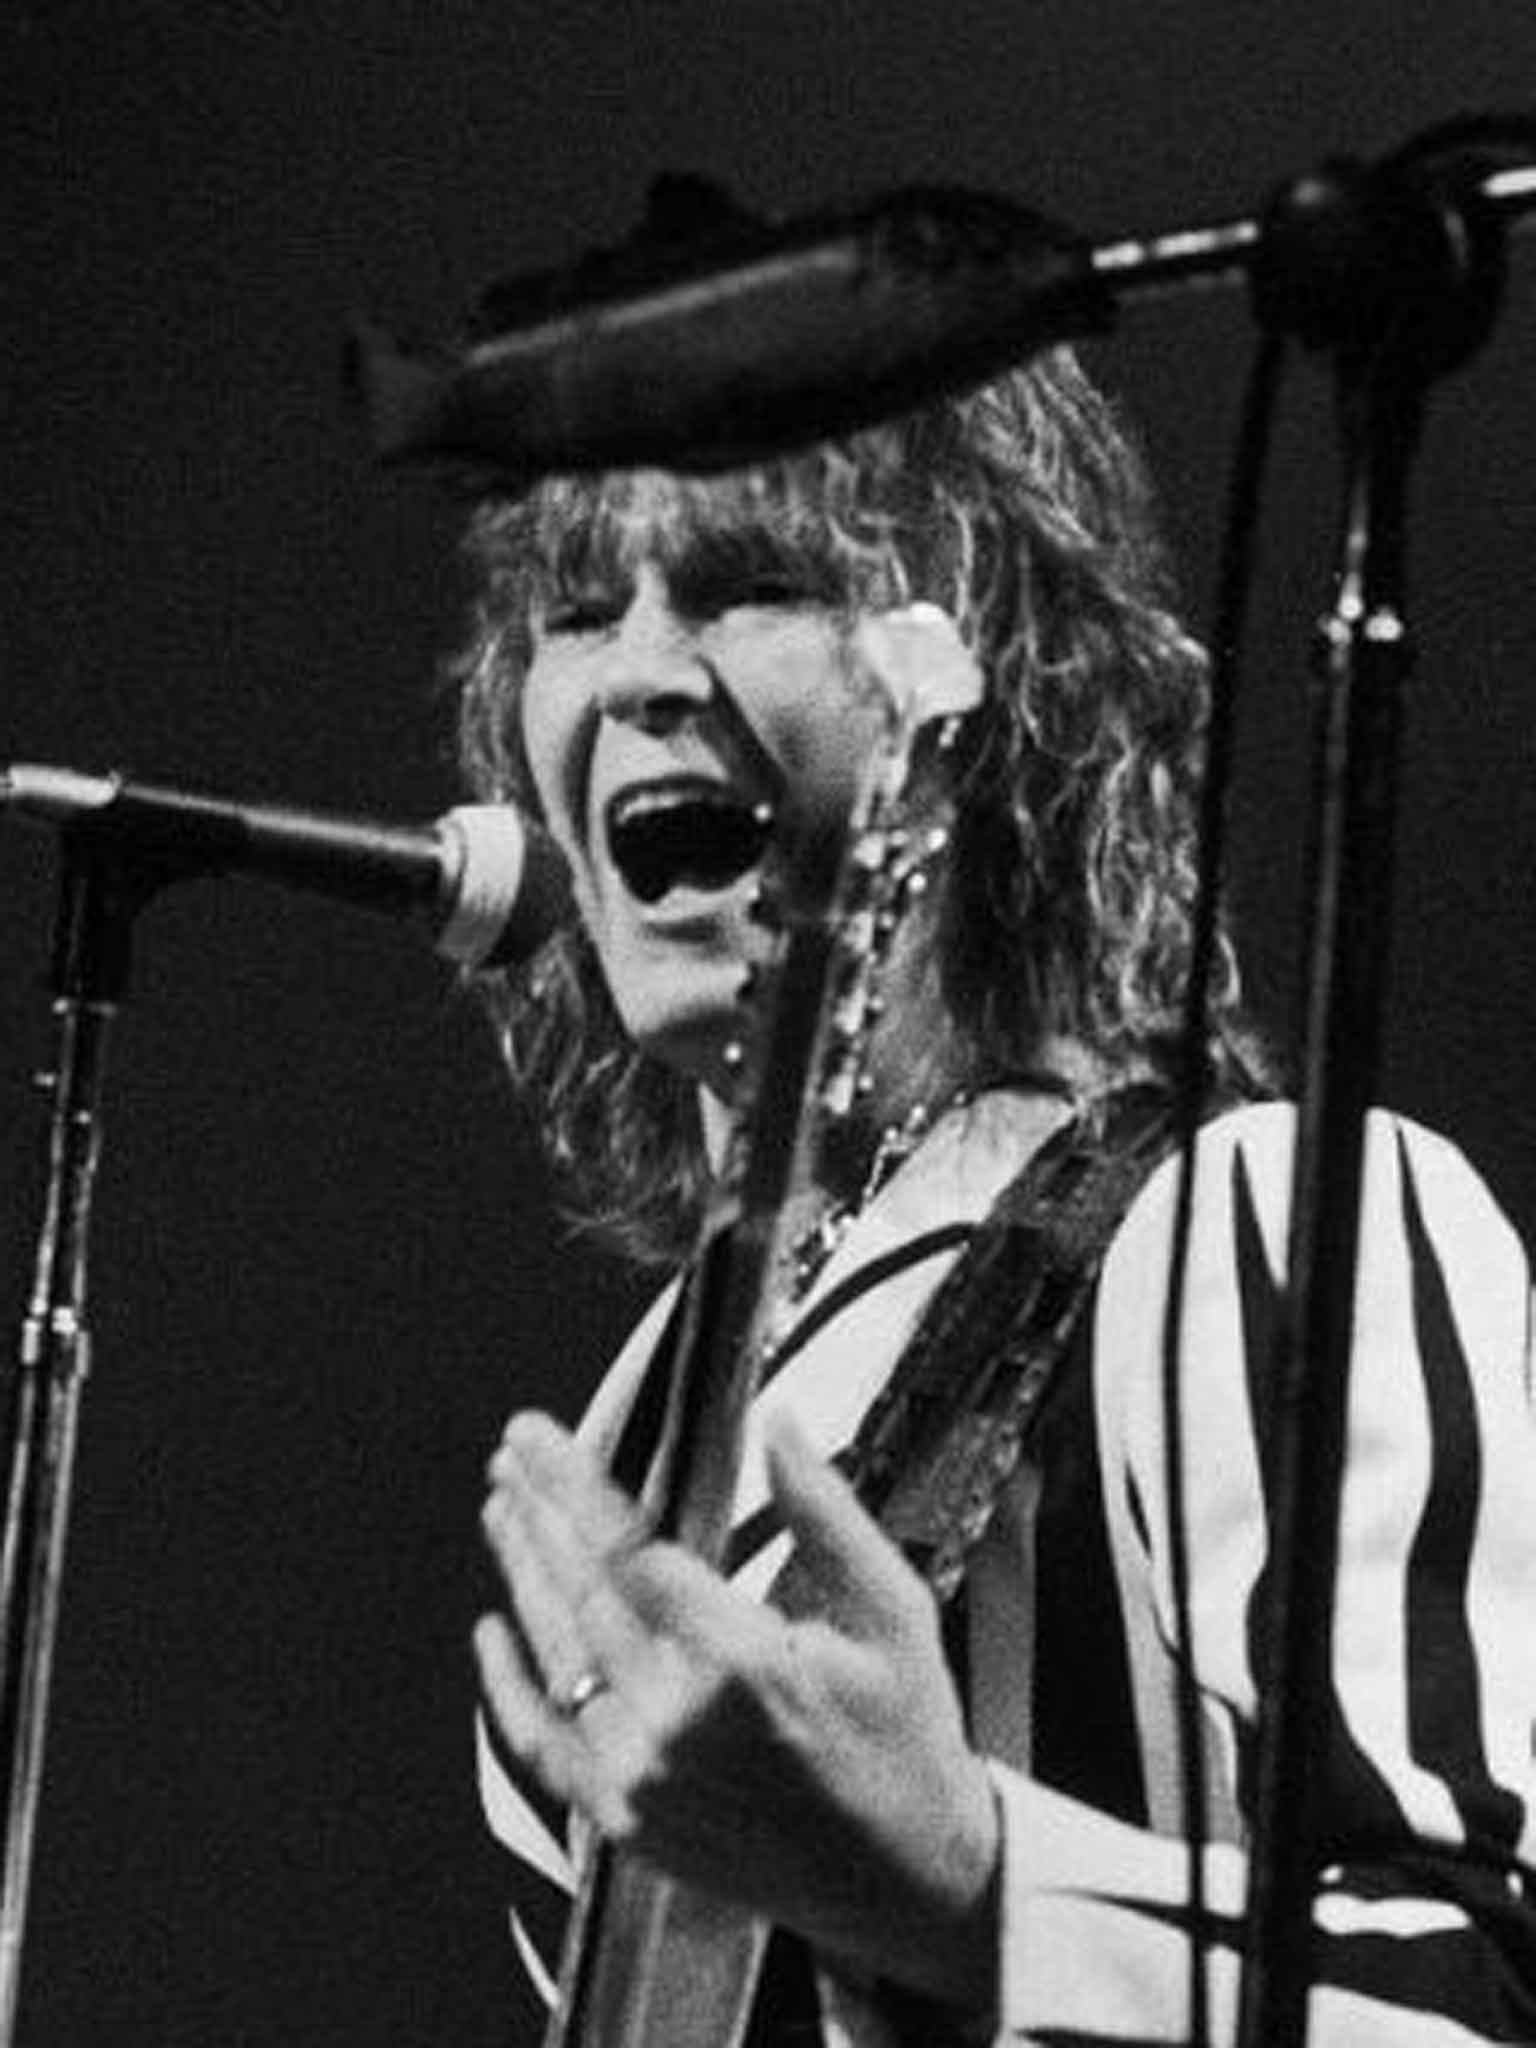 Chris Squire Innovative bass guitarist, singer and songwriter who co-founded Yes, best-selling giants of progressive rock The Independent The Independent pic